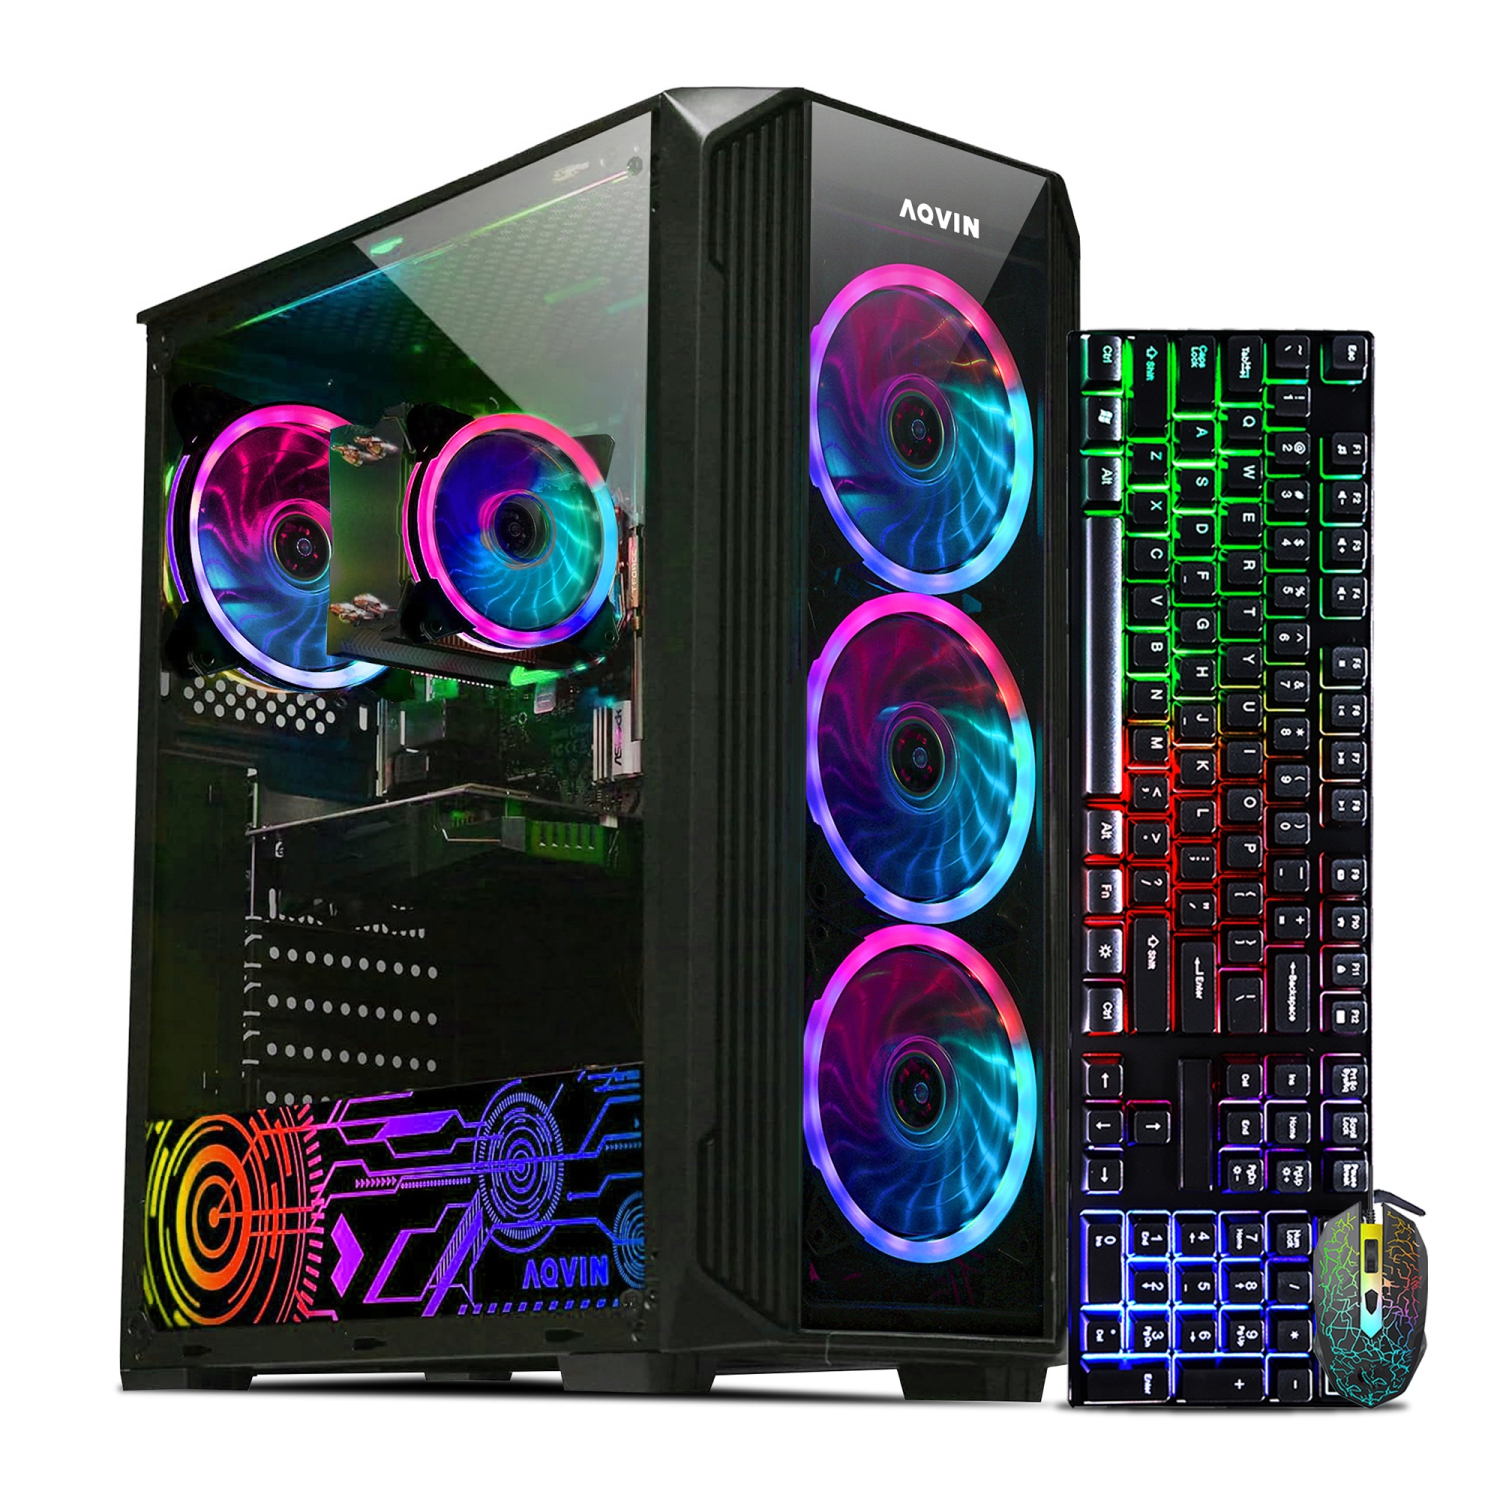 Refurbished (Excellent) Gaming PC AQVIN ZForce Tower (Core i7/ GeForce RTX 3060 12GB/ 512GB SSD(fast boost) + 2TB HDD/ 32GB DDR4 RAM/ WIN 10 Pro) Desktop Computer - Only at Bestbuy